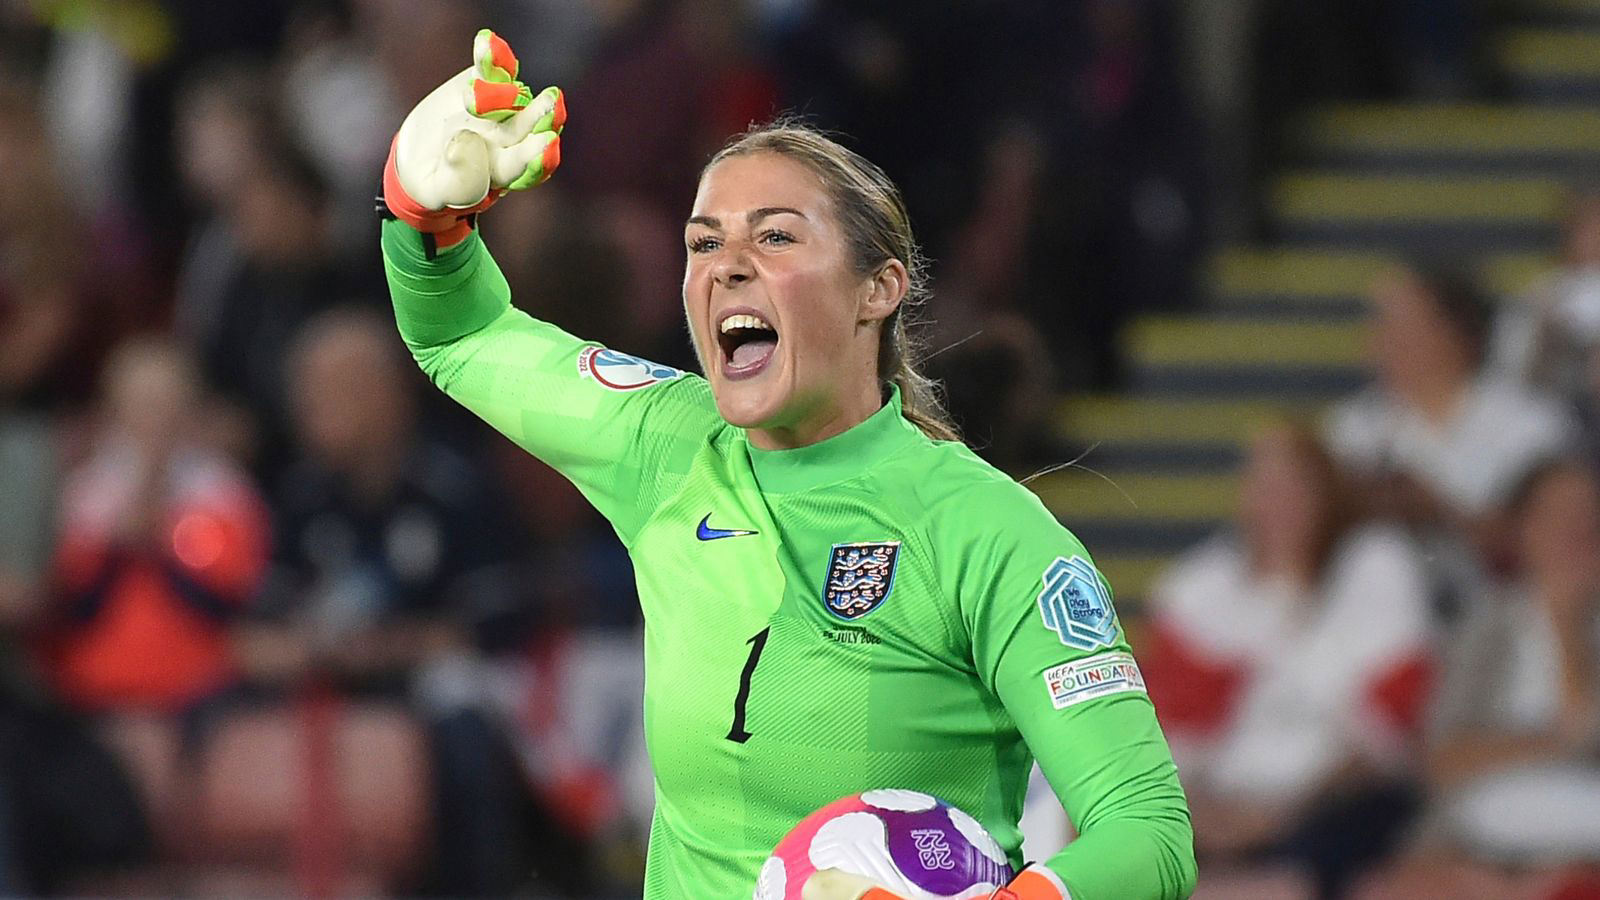 'Very hurtful': England goalkeeper hits out at Nike over shirt row